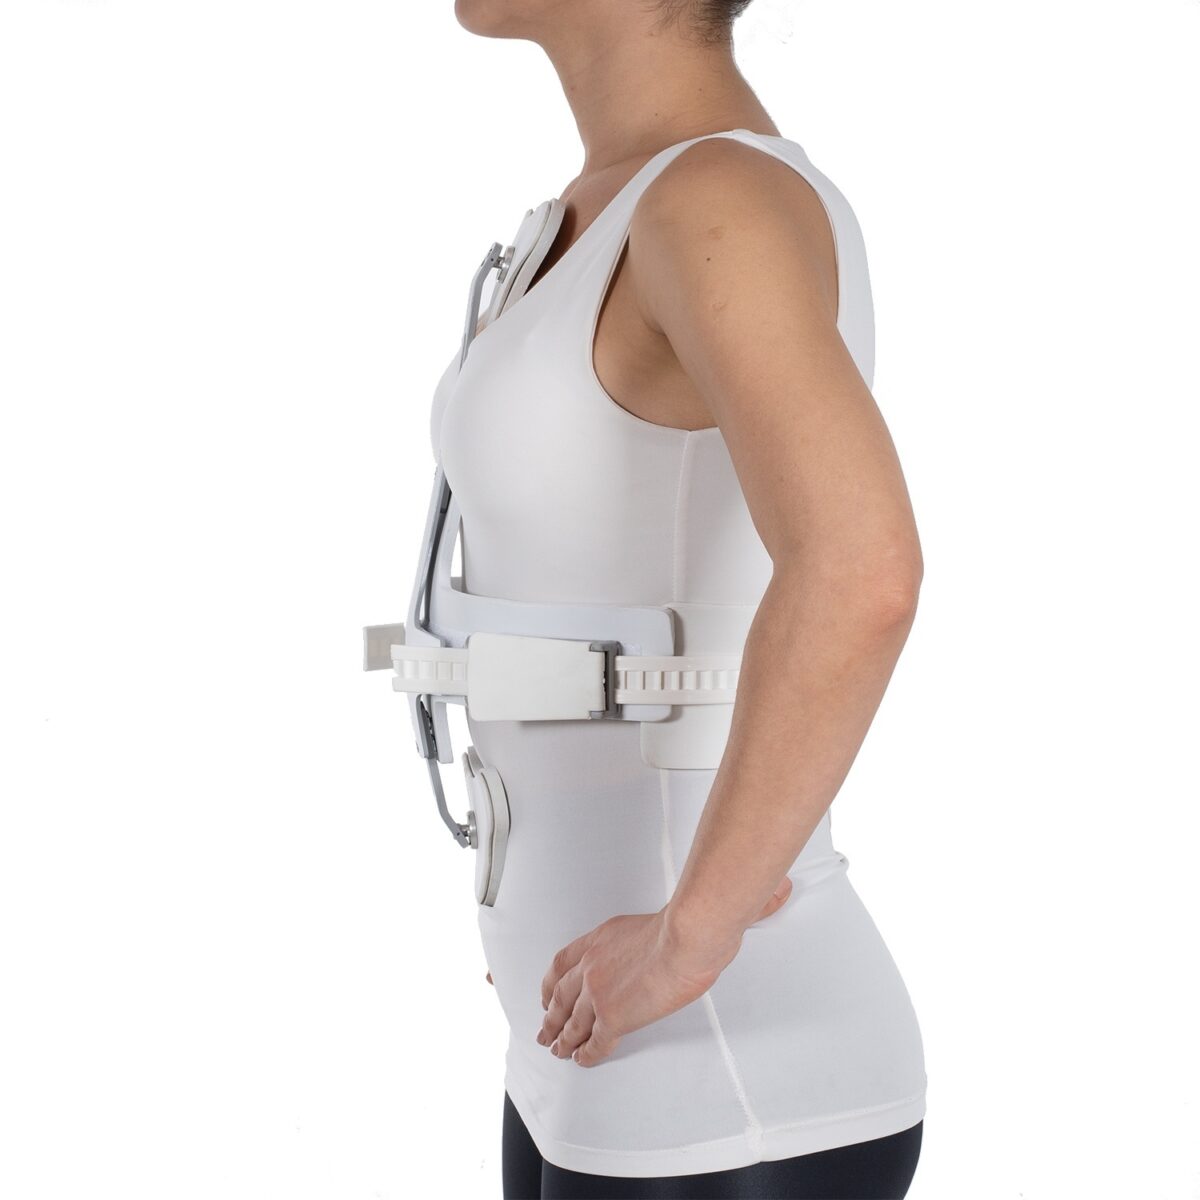 wingmed orthopedic equipments W449 hiperextension corset 3 points 68